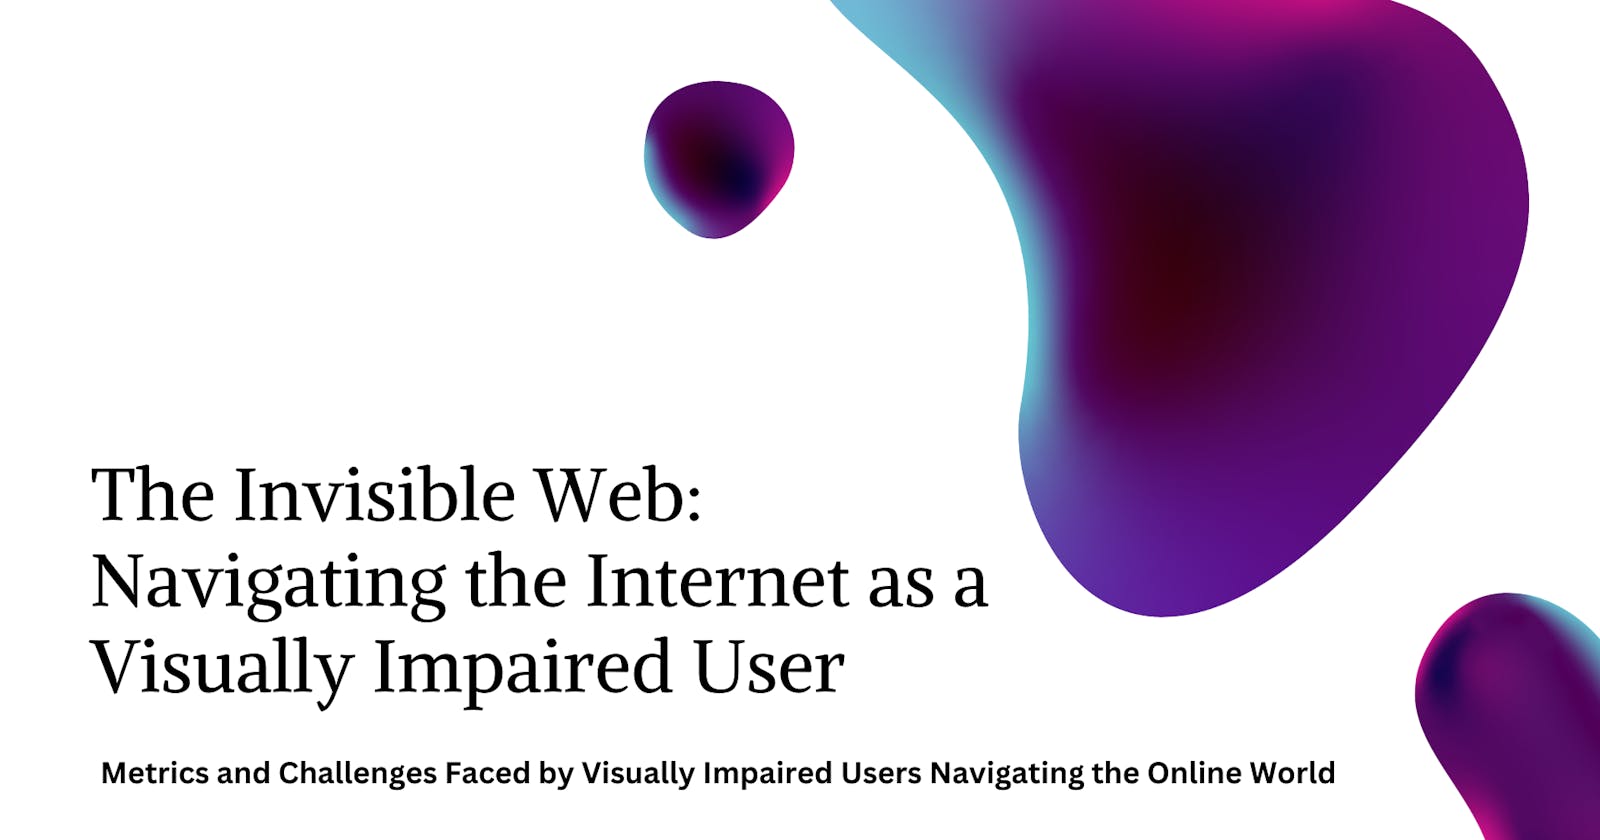 The Invisible Web: Navigating the Internet as a Visually Impaired User